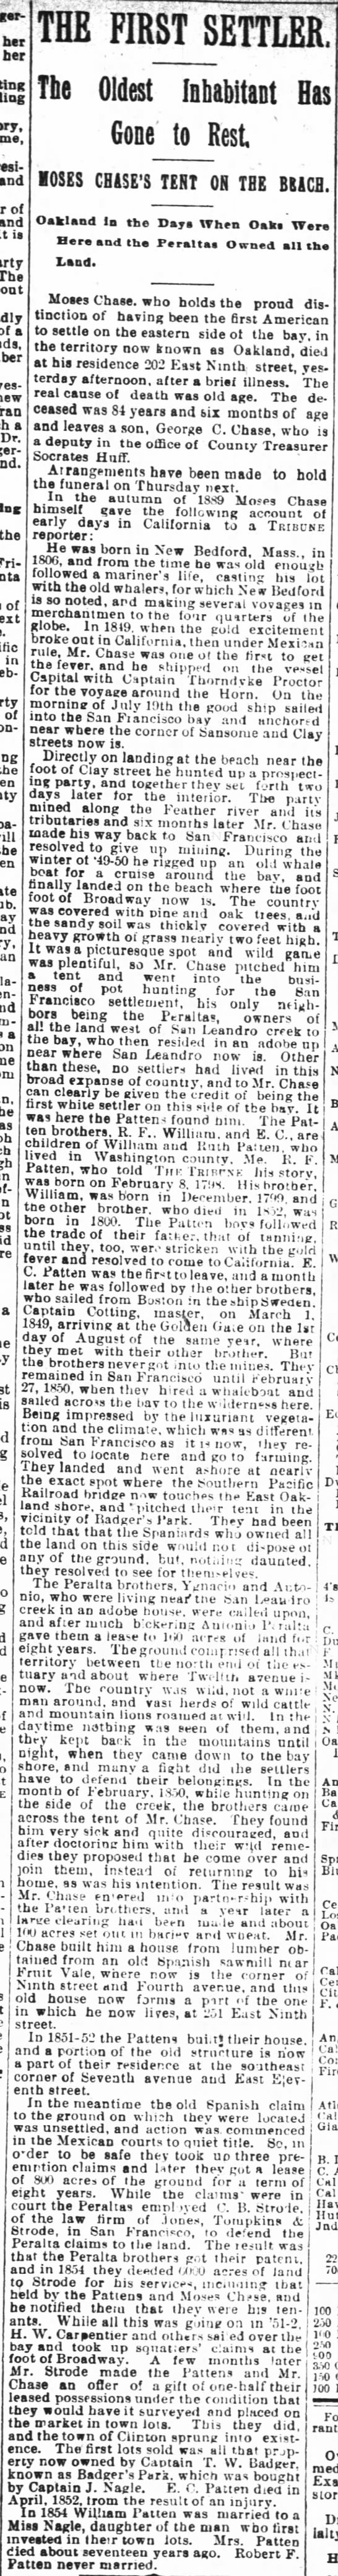 Moses Chase death
Story of Oakland's beginnings; Patten, Carpentier, Peralta - 